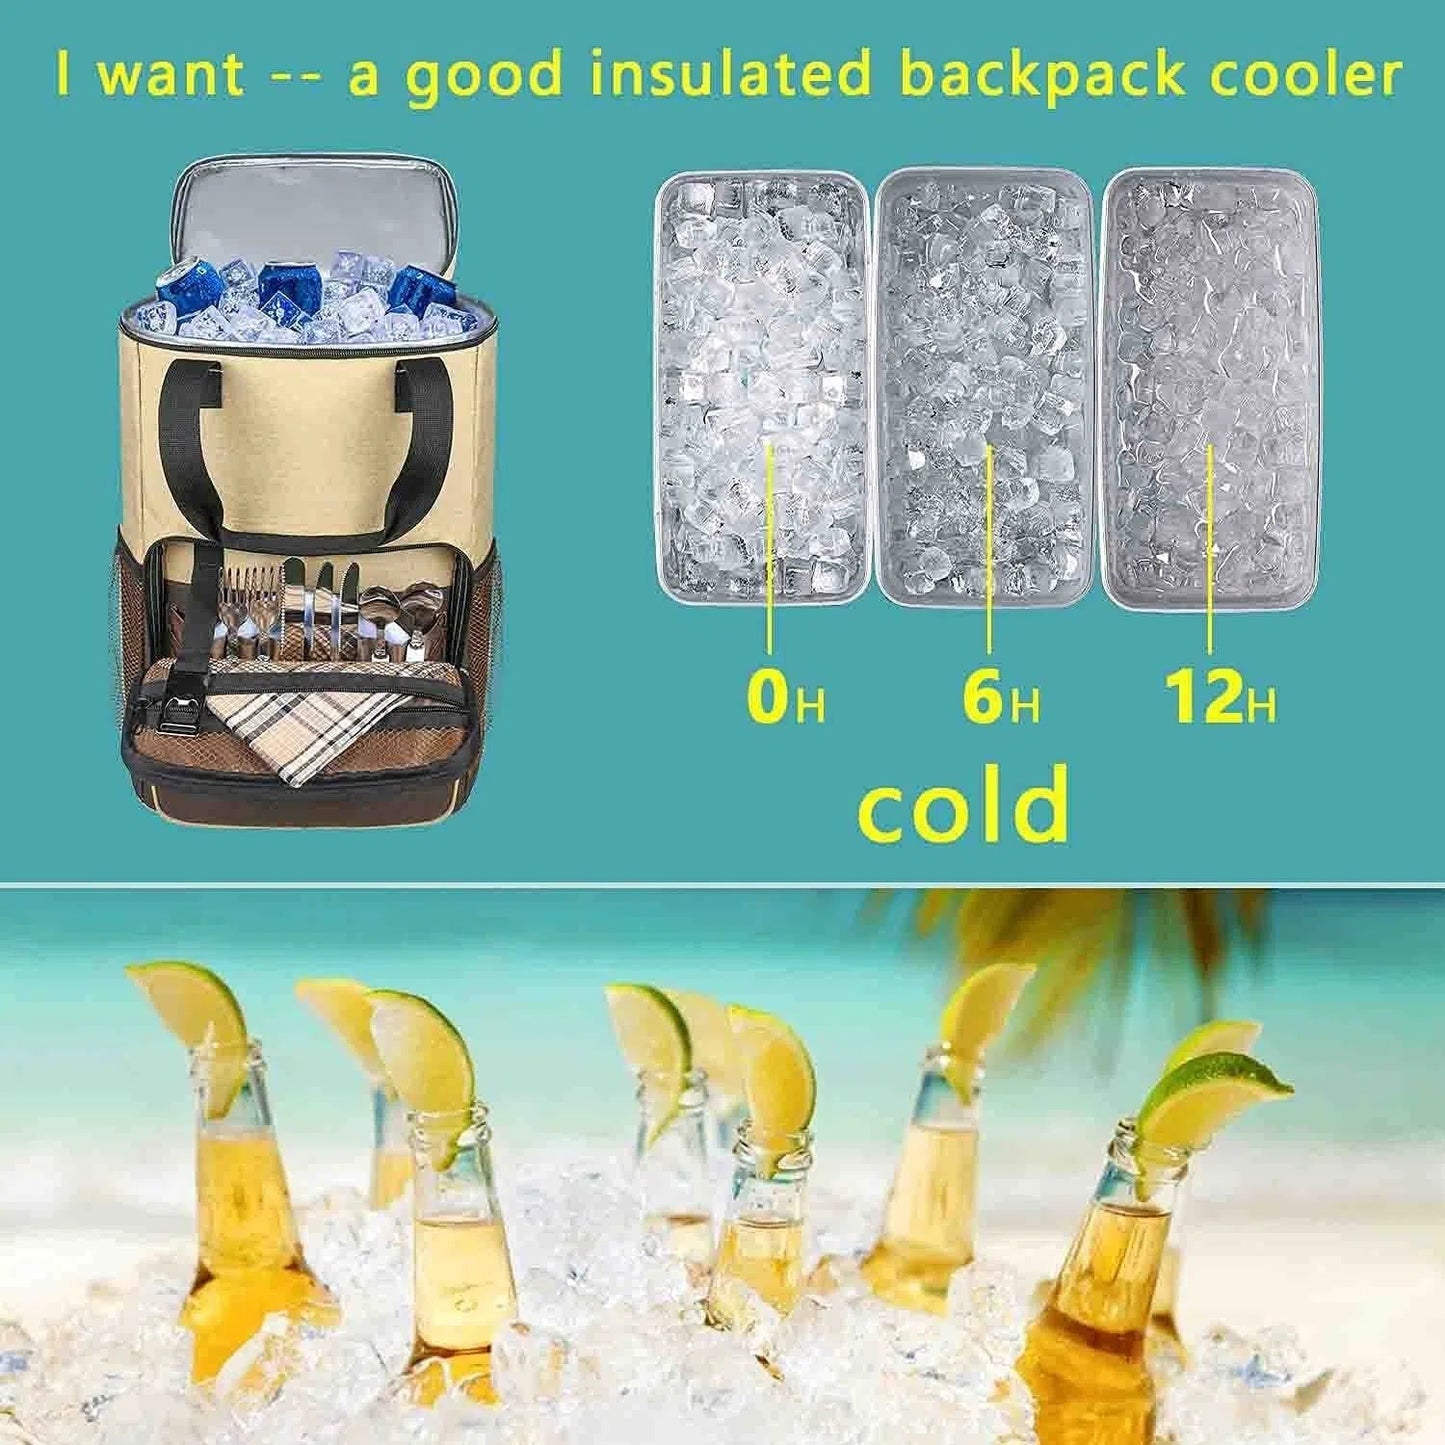 Hap Tim Backpack Cooler Insulated Leak-Proof Cooler Backpack Large Capacity 30 Cans Soft Cooler Bag for Men Women to Picnics, Hiking, Camping, Beach, Lunch, Park or Day Trips (13760-BR)